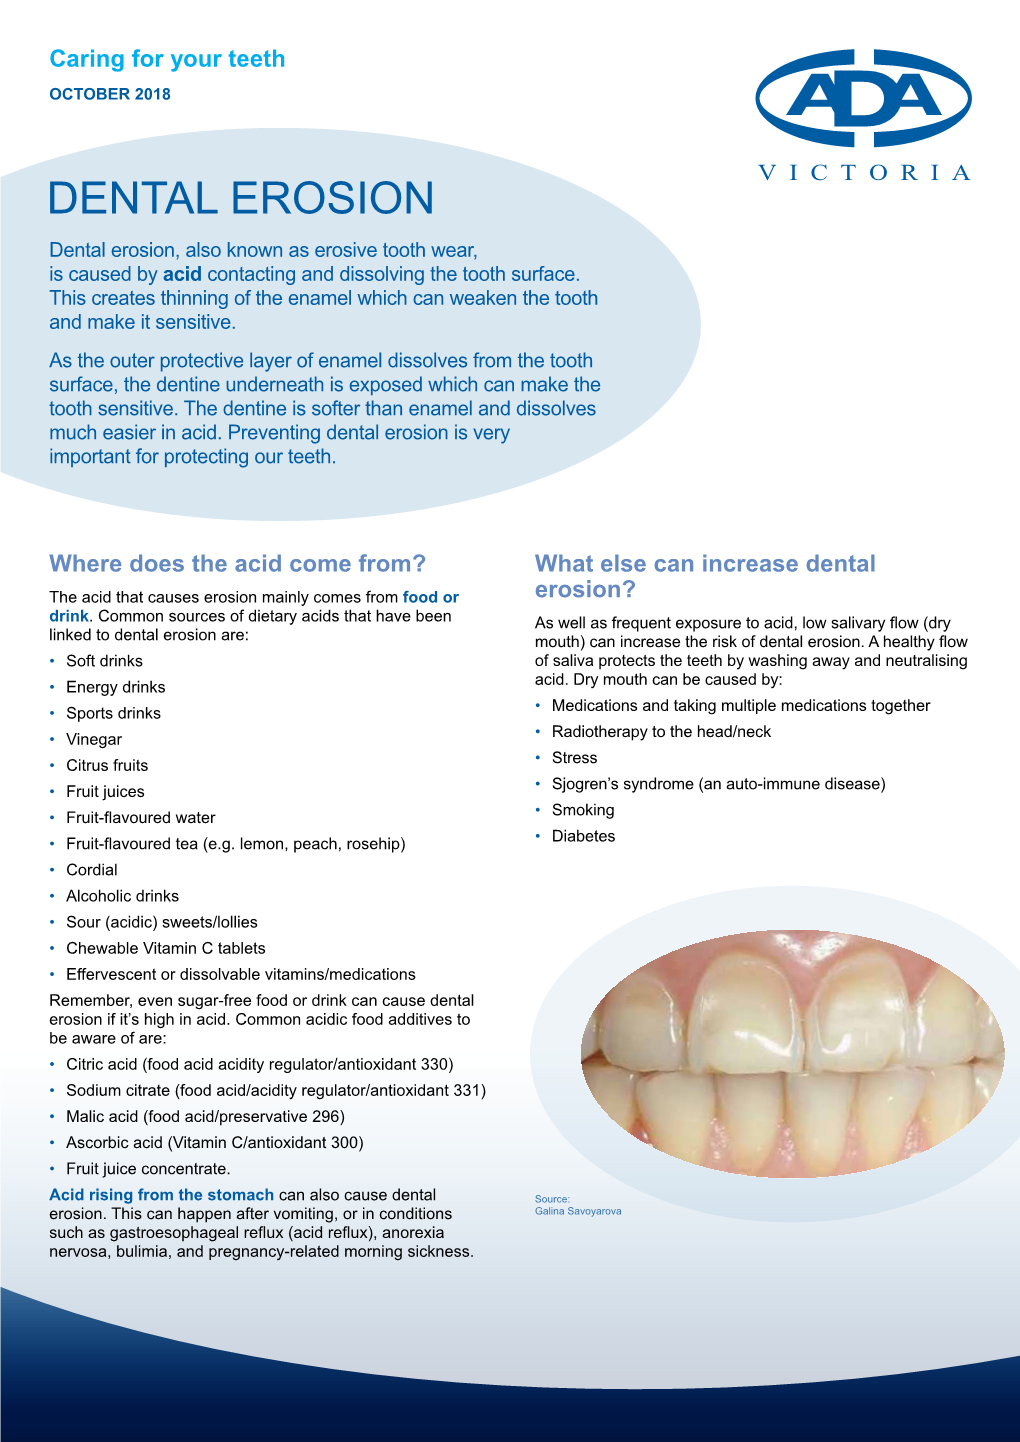 DENTAL EROSION Dental Erosion, Also Known As Erosive Tooth Wear, Is Caused by Acid Contacting and Dissolving the Tooth Surface